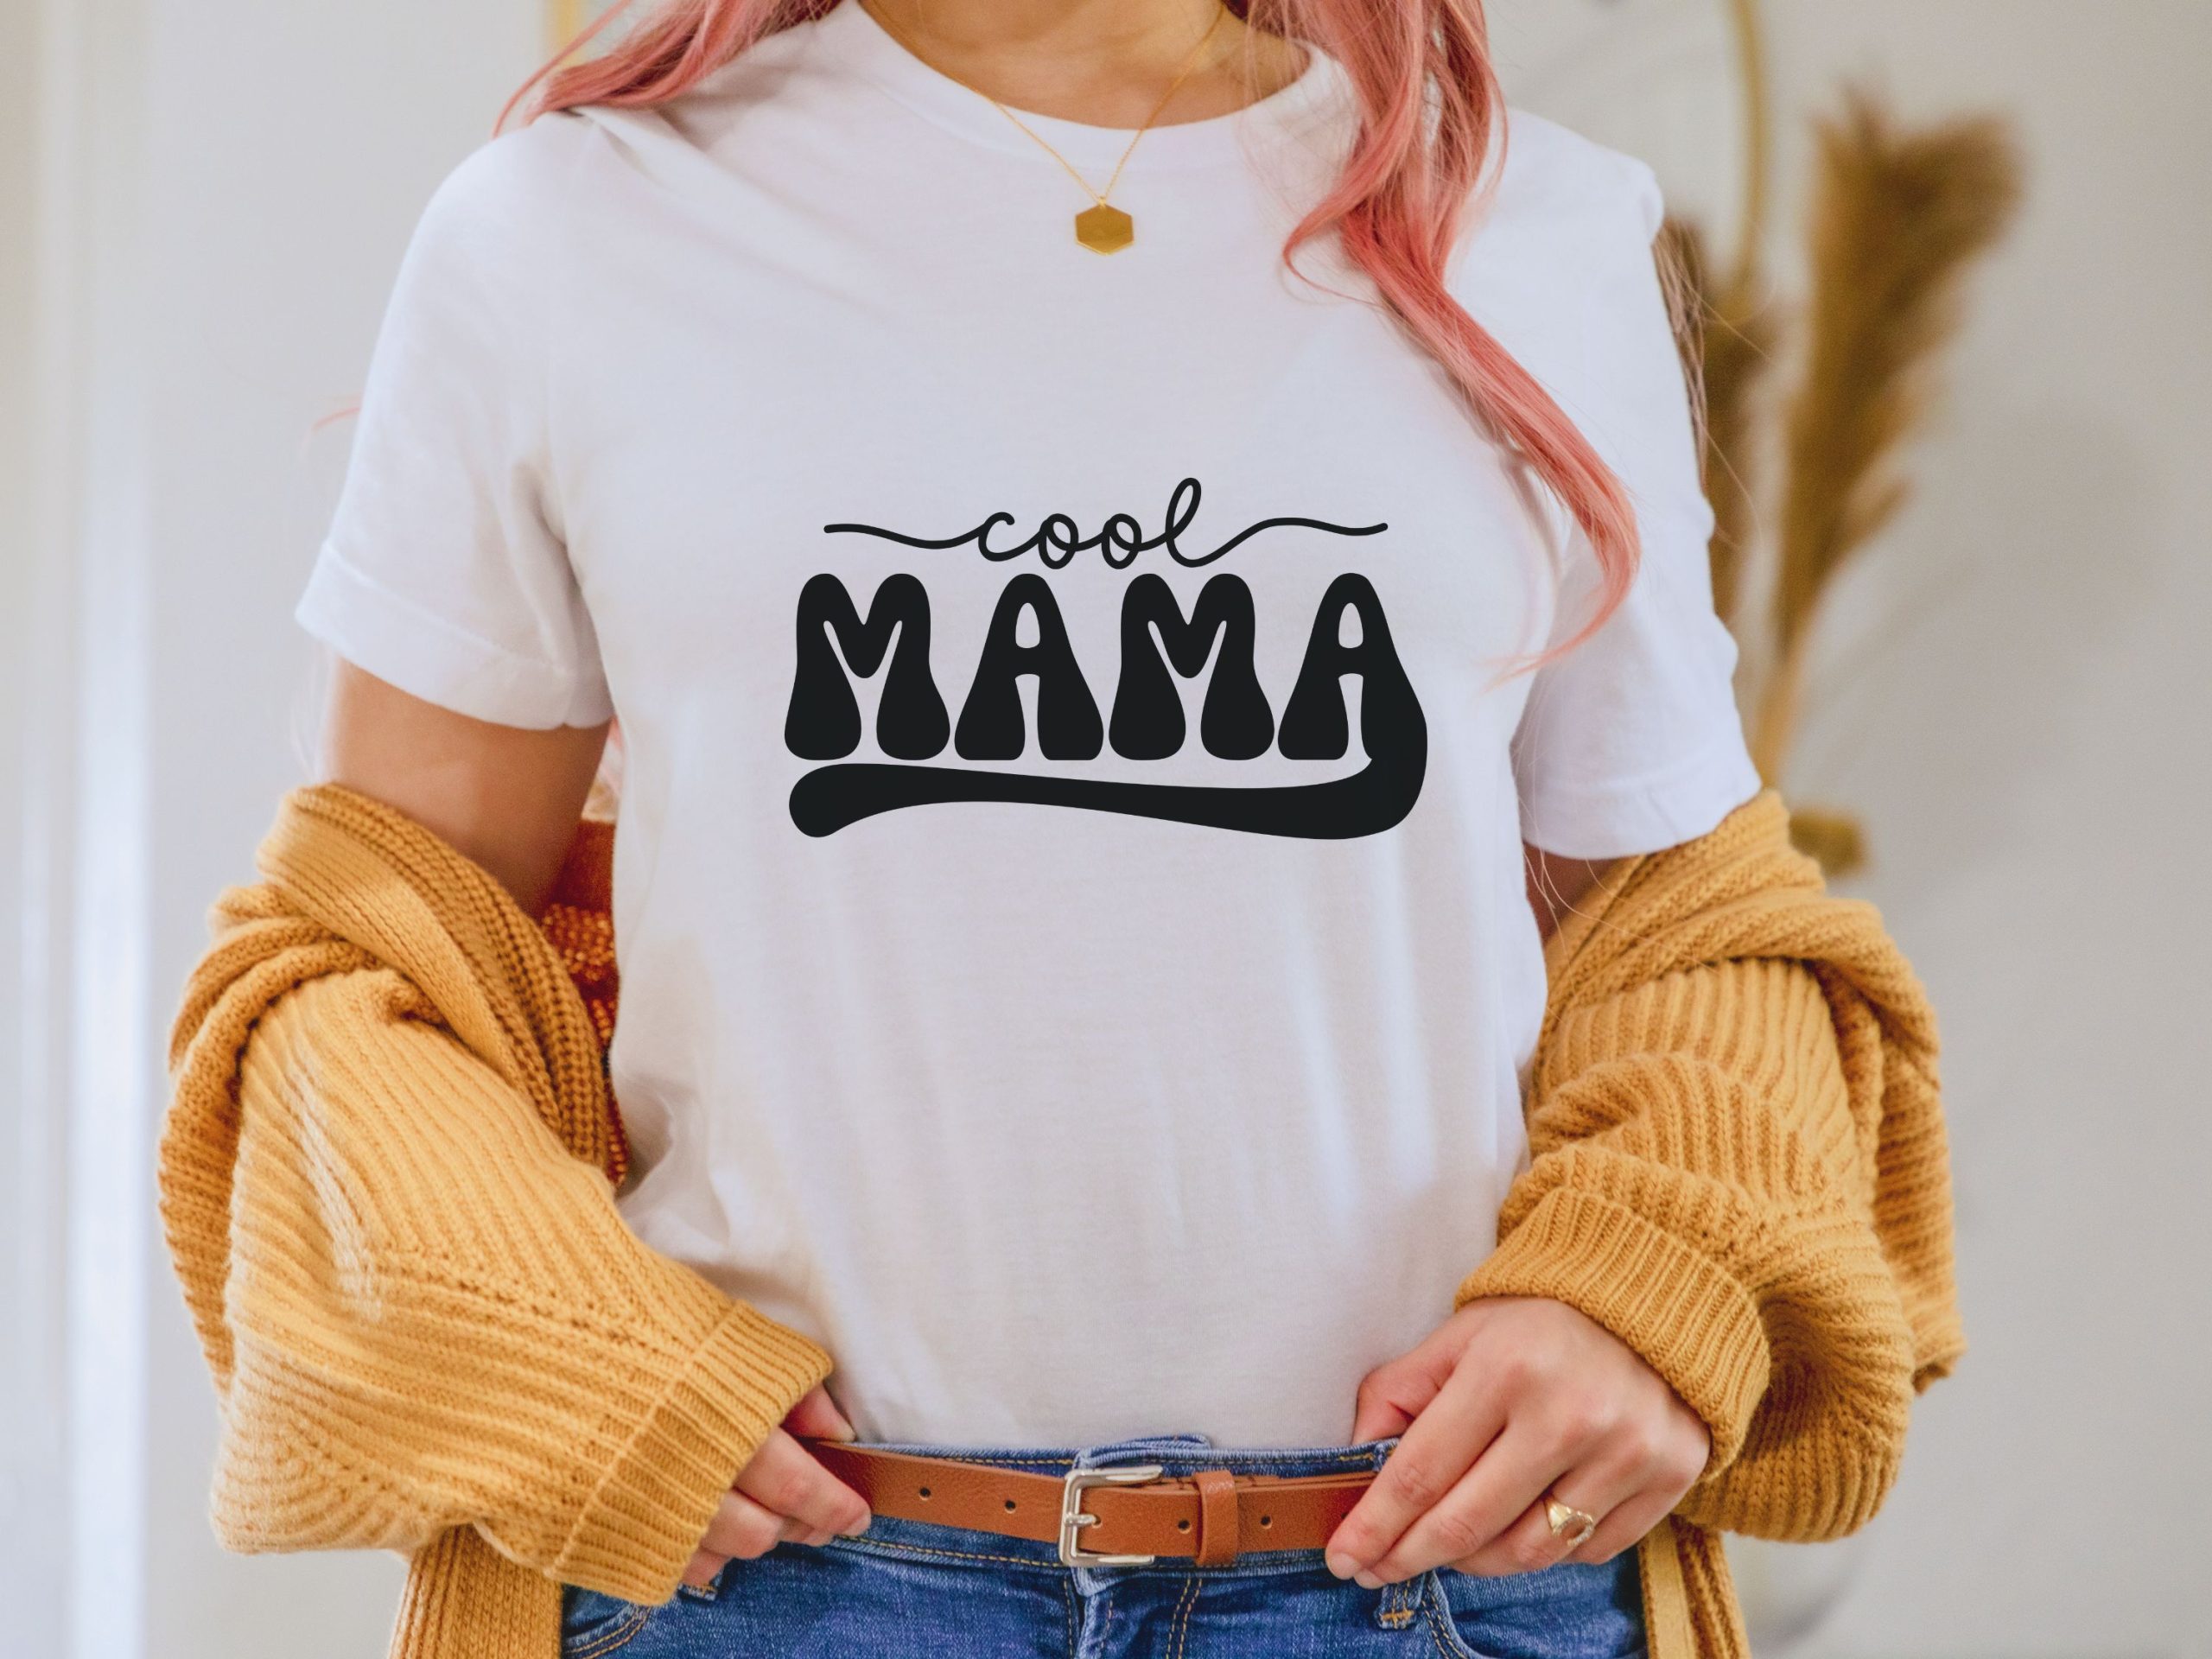 Cool mama shirt, Mothers Day shirt gift, Gift for mom